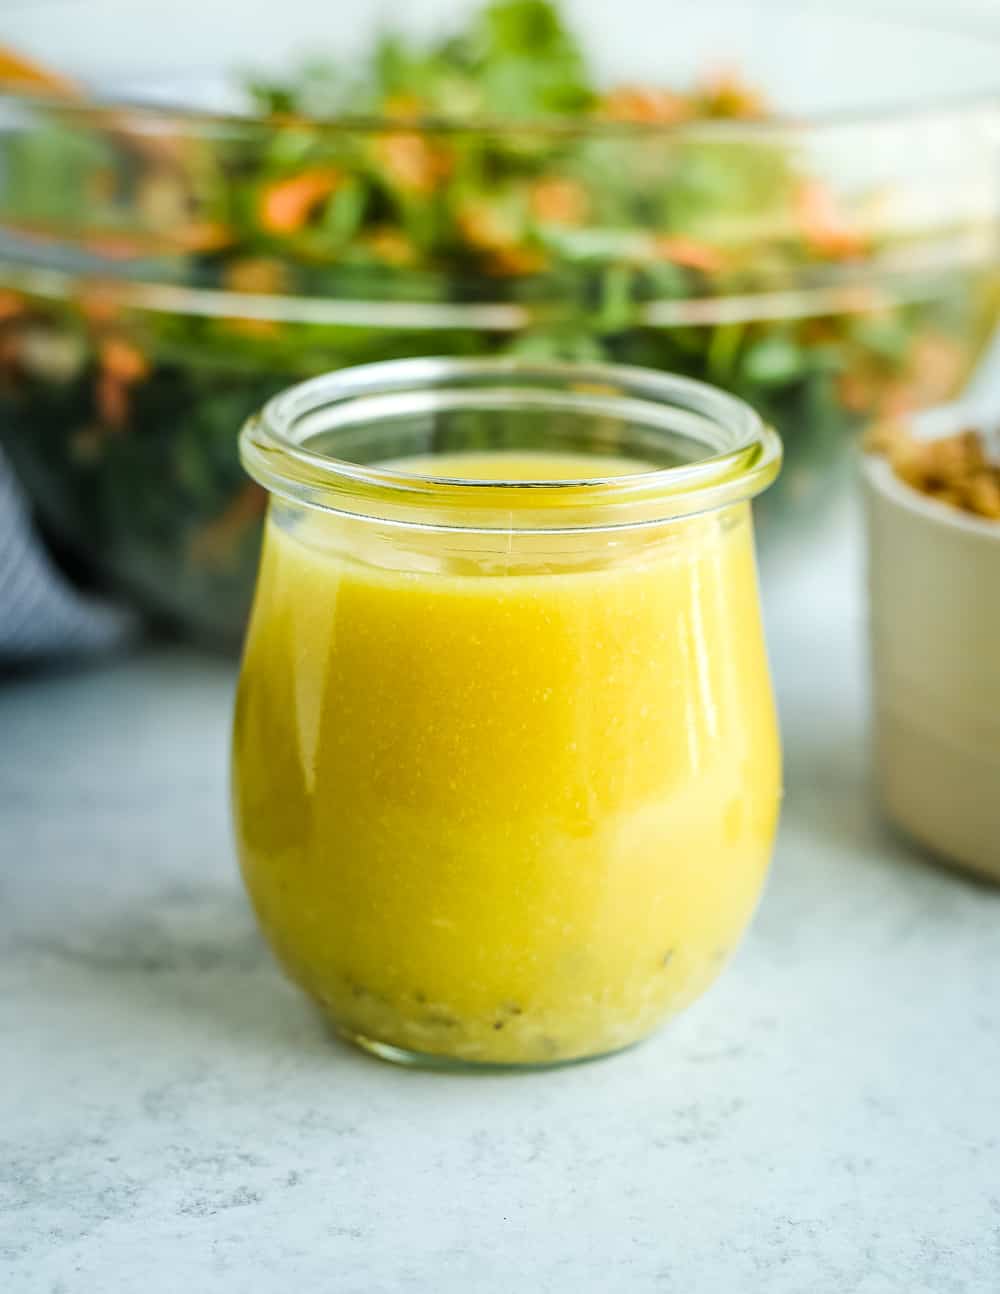 A small glass jar filled with a homemade Lemon-Garlic Dressing to be served with this Israeli couscous recipe